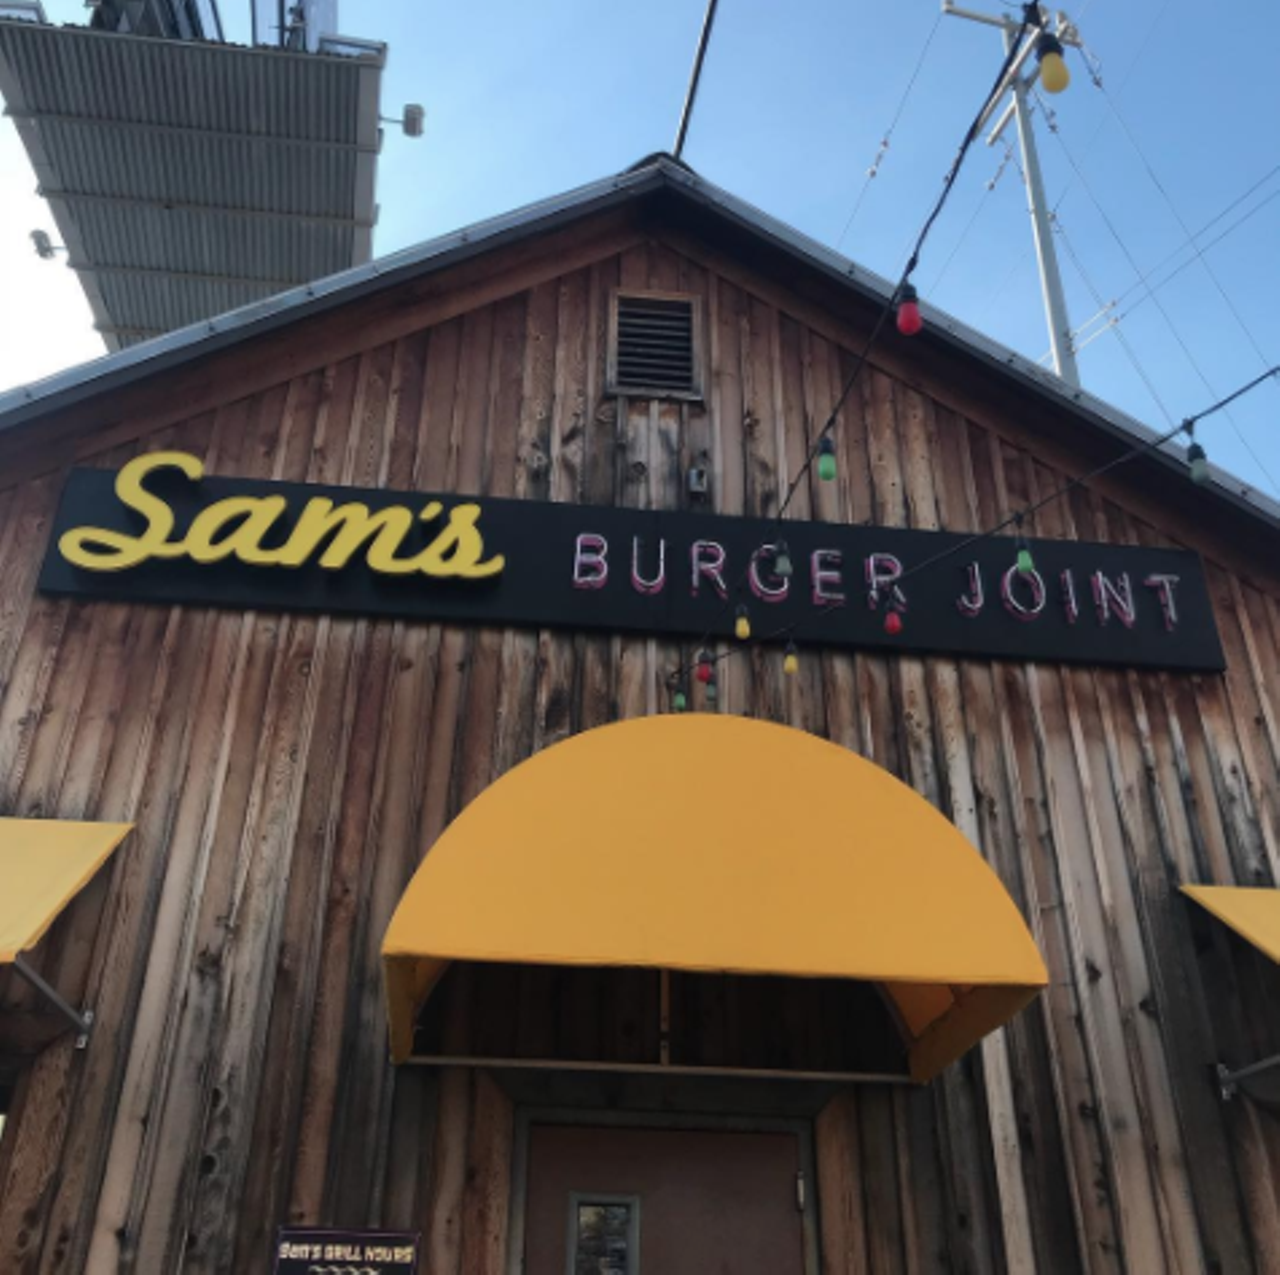 Sam’s Burger Joint Music Hall
330 E. Grayson St., (210) 223-2830, samsburgerjoint.com
Come for the burgers, stay for the music. Or maybe it's the other way around? Either way, you're in for a fun and tasty night.
Photo via Instagram, jenniesuesview